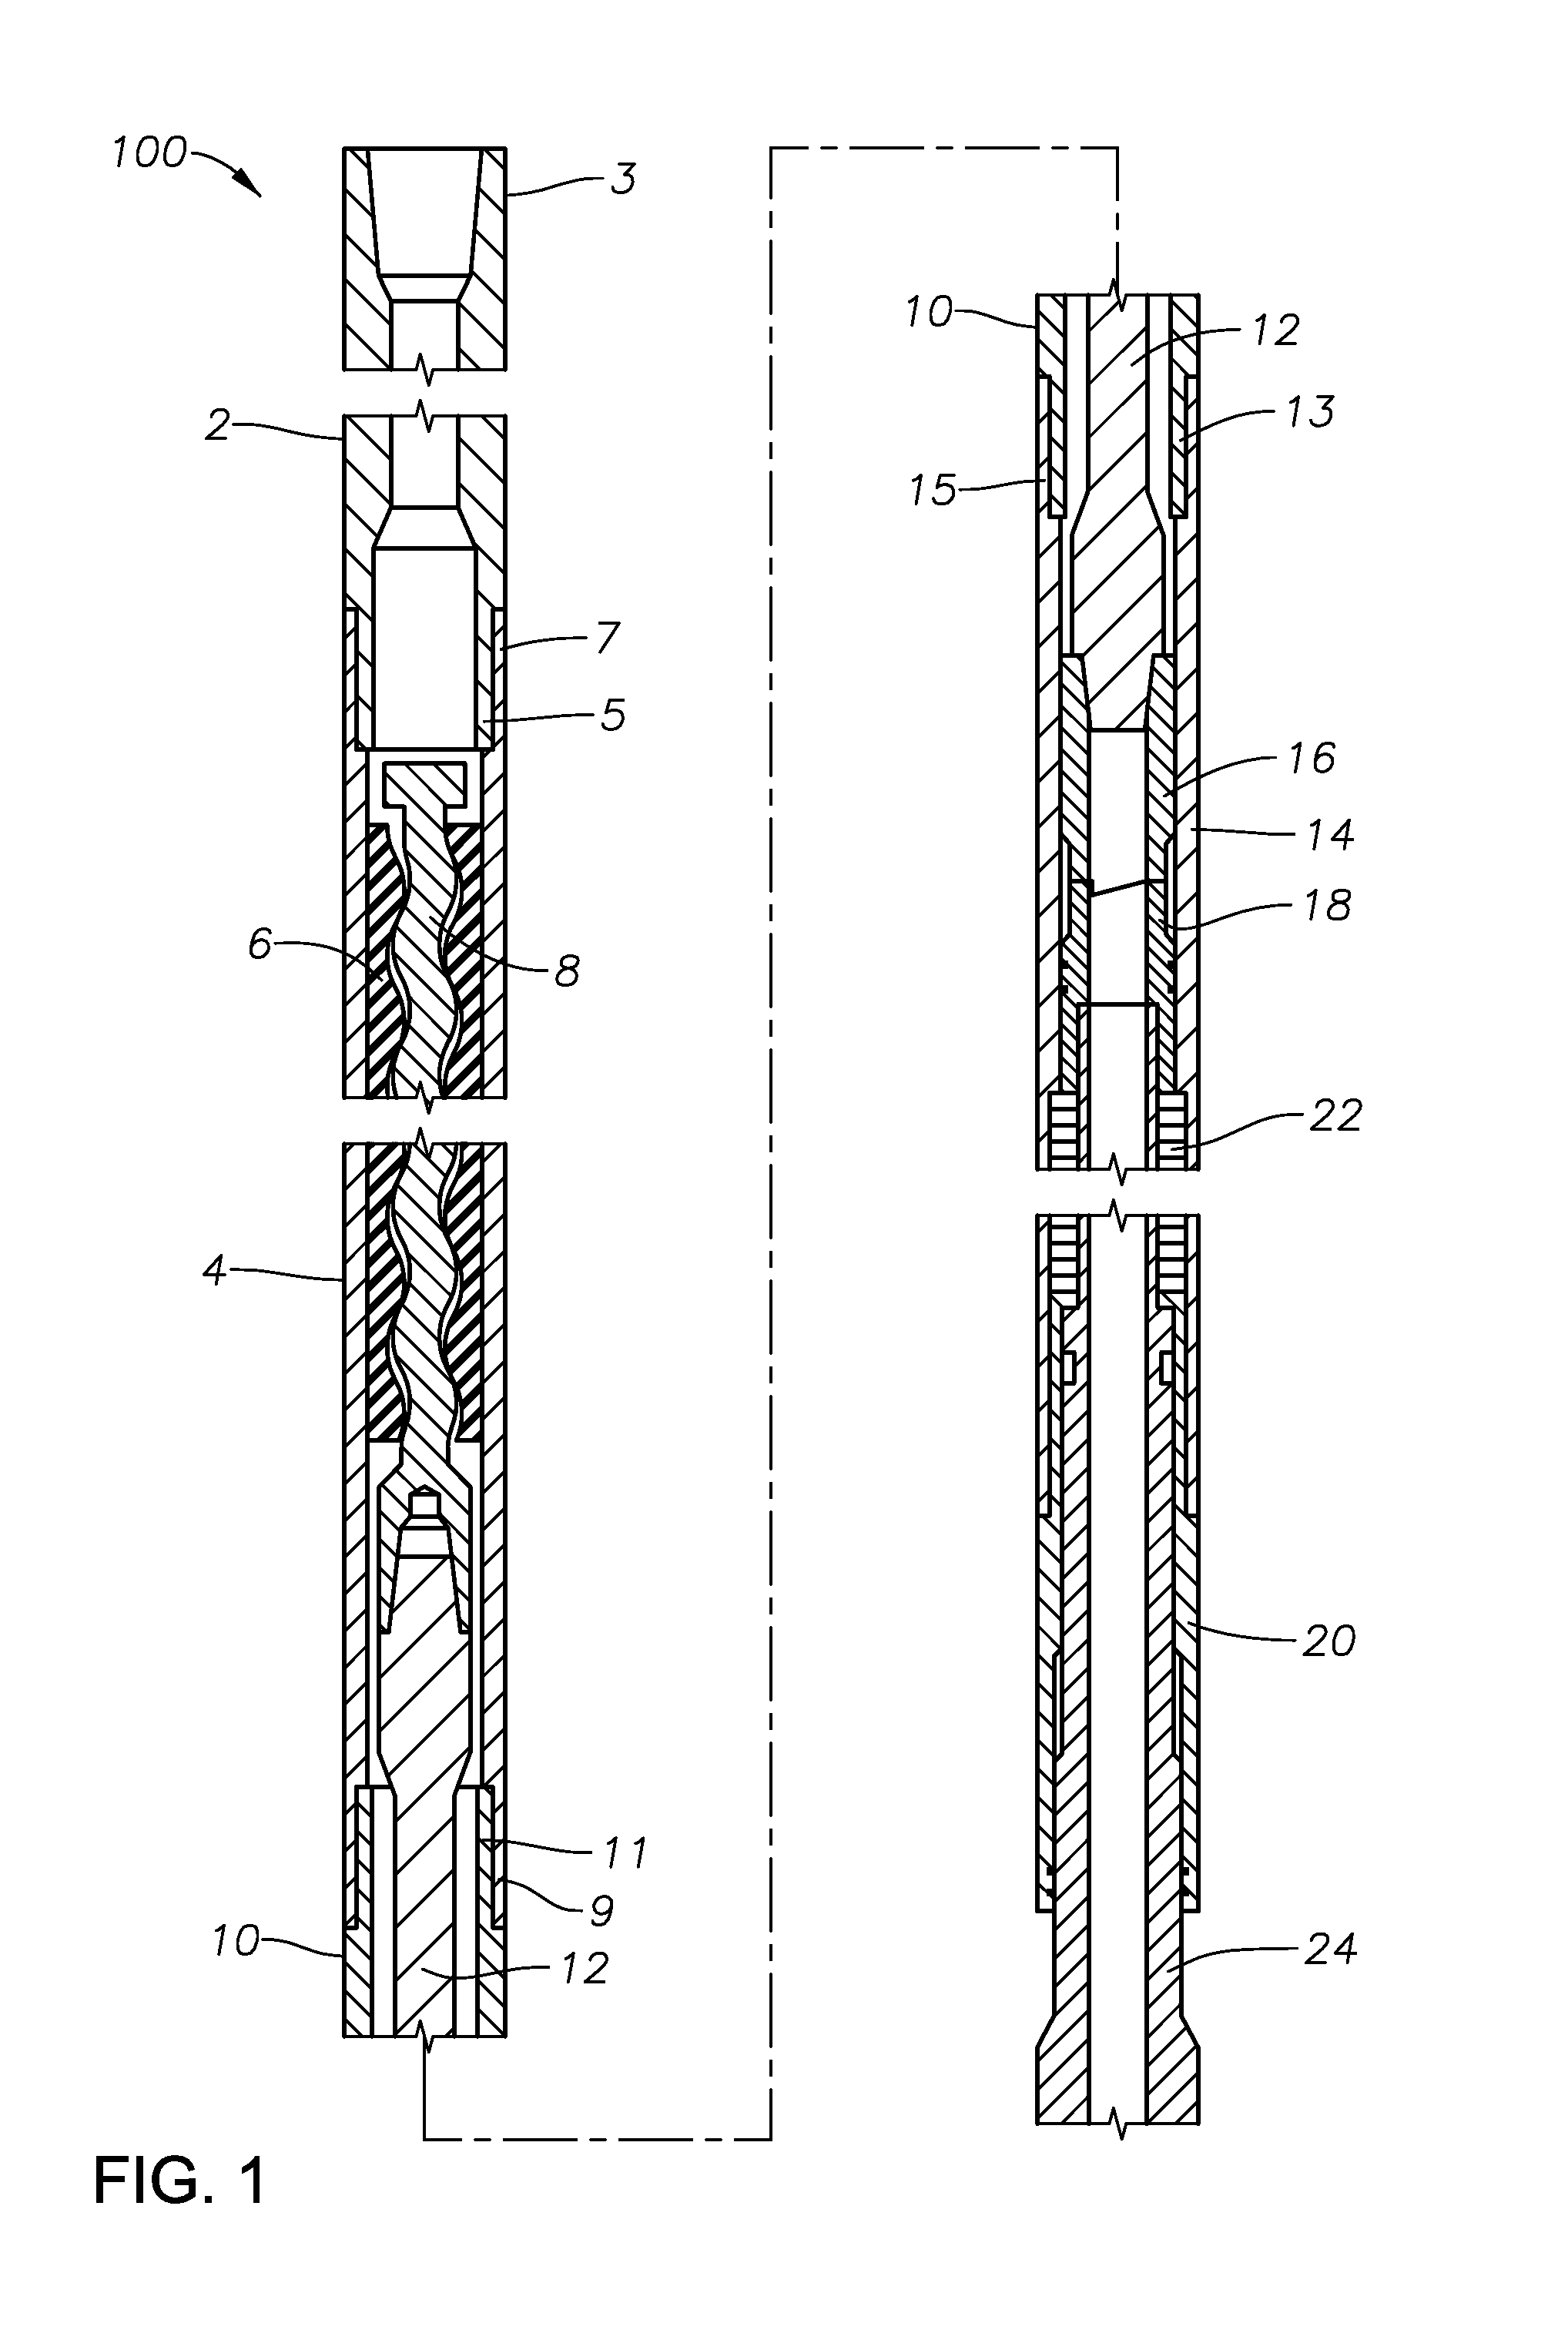 Systems and methods for producing forced axial vibration of a drillstring